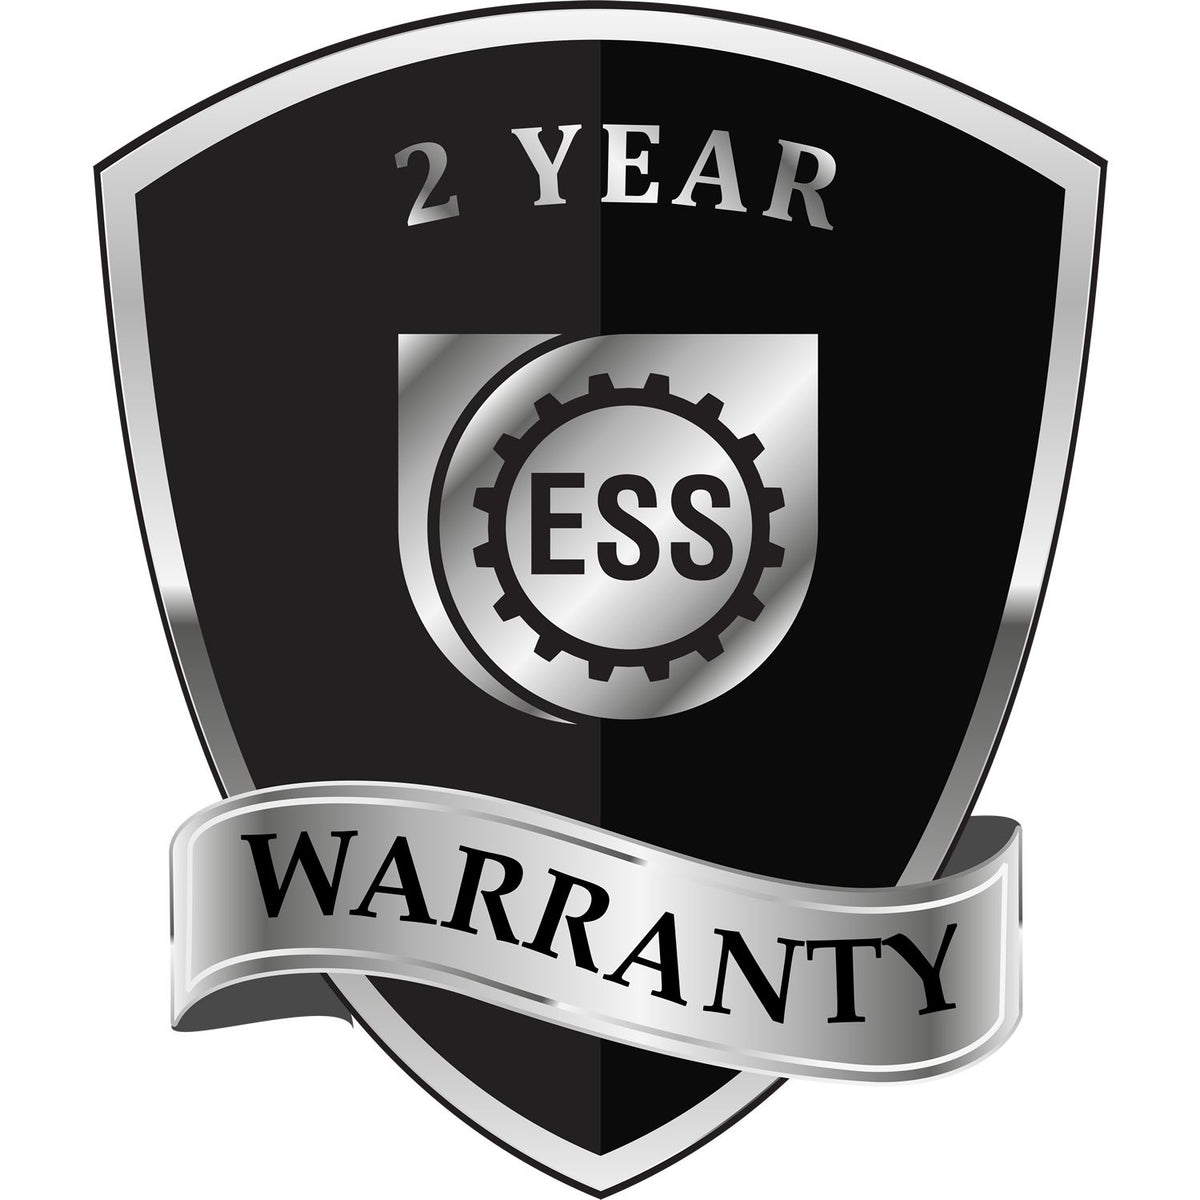 A badge or emblem showing a warranty icon for the Soft Alaska Professional Engineer Seal